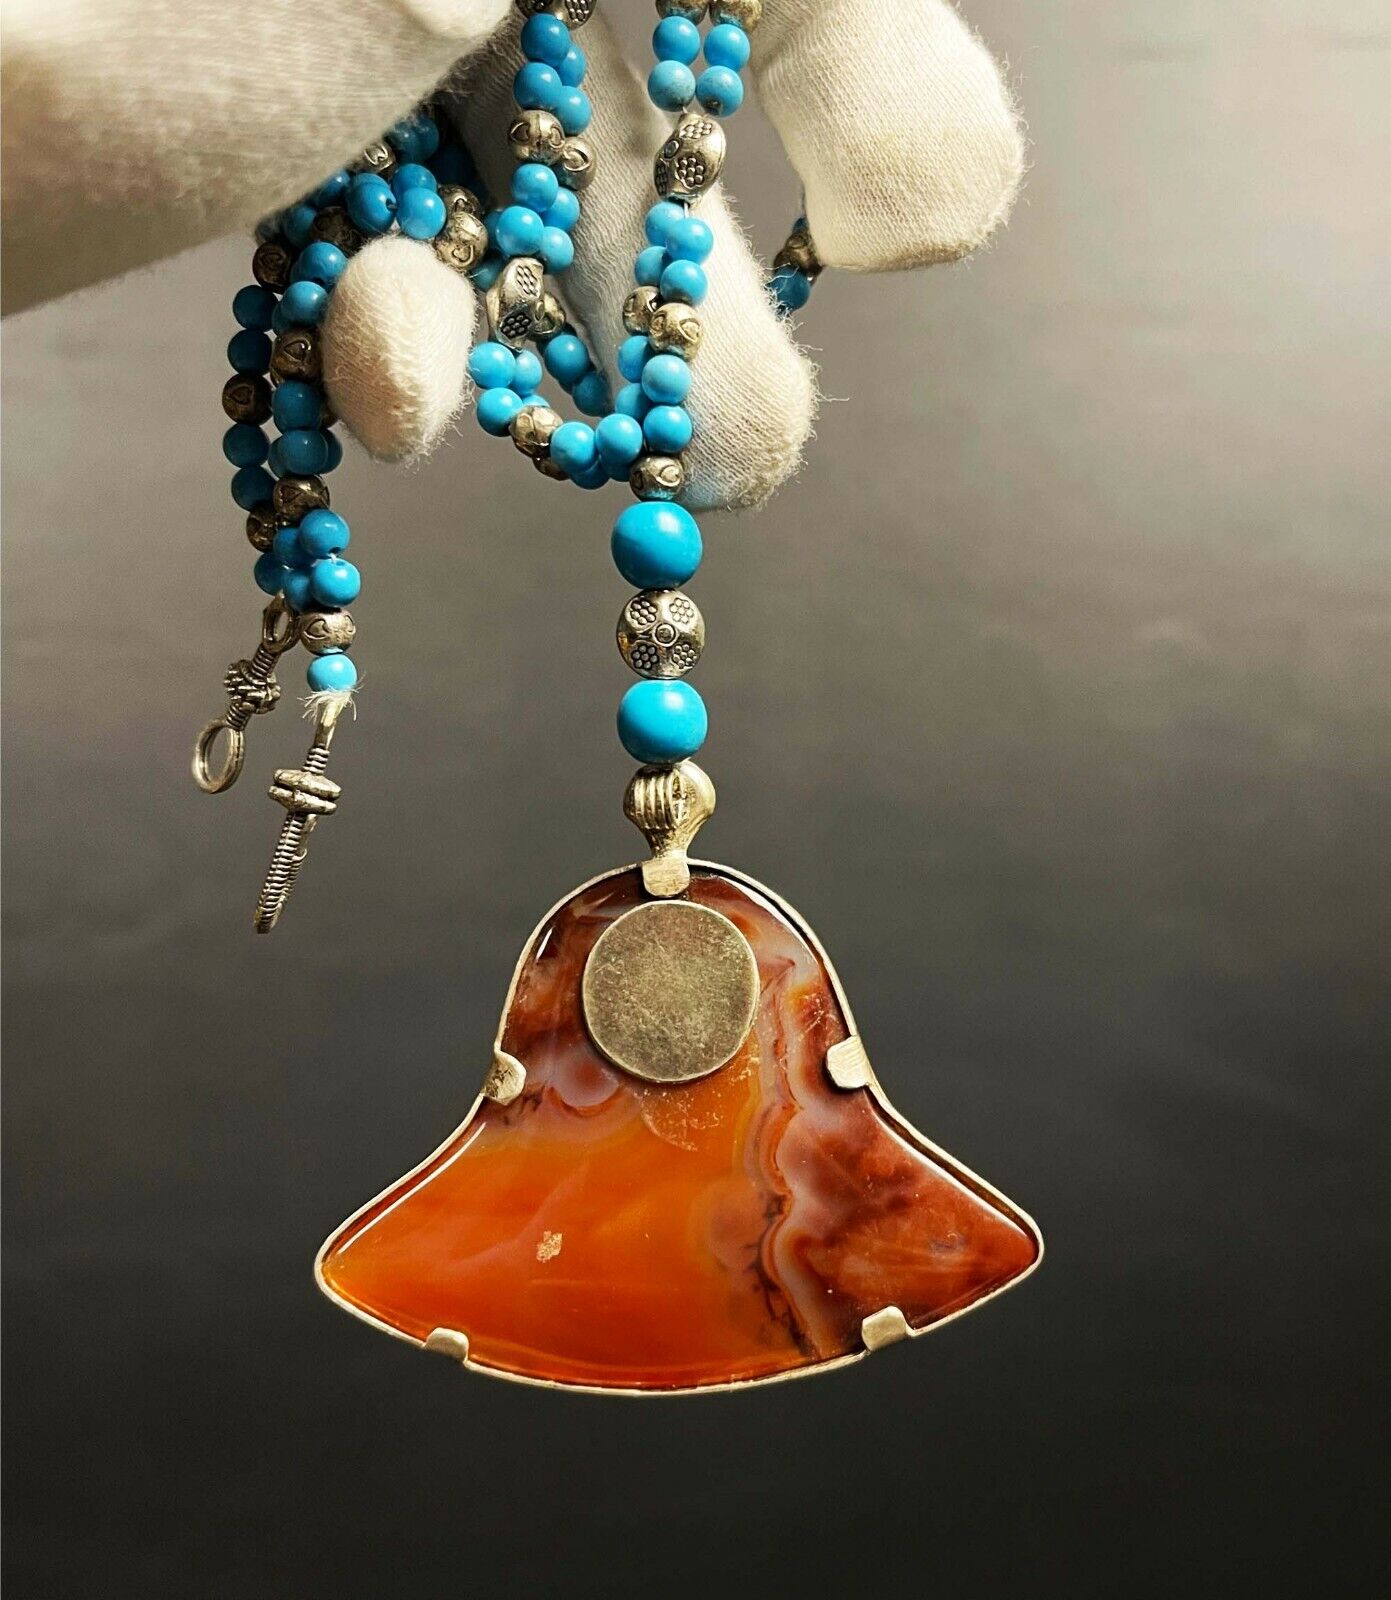 Marvelous Egyptian necklace made from The unique Healing Agate stone